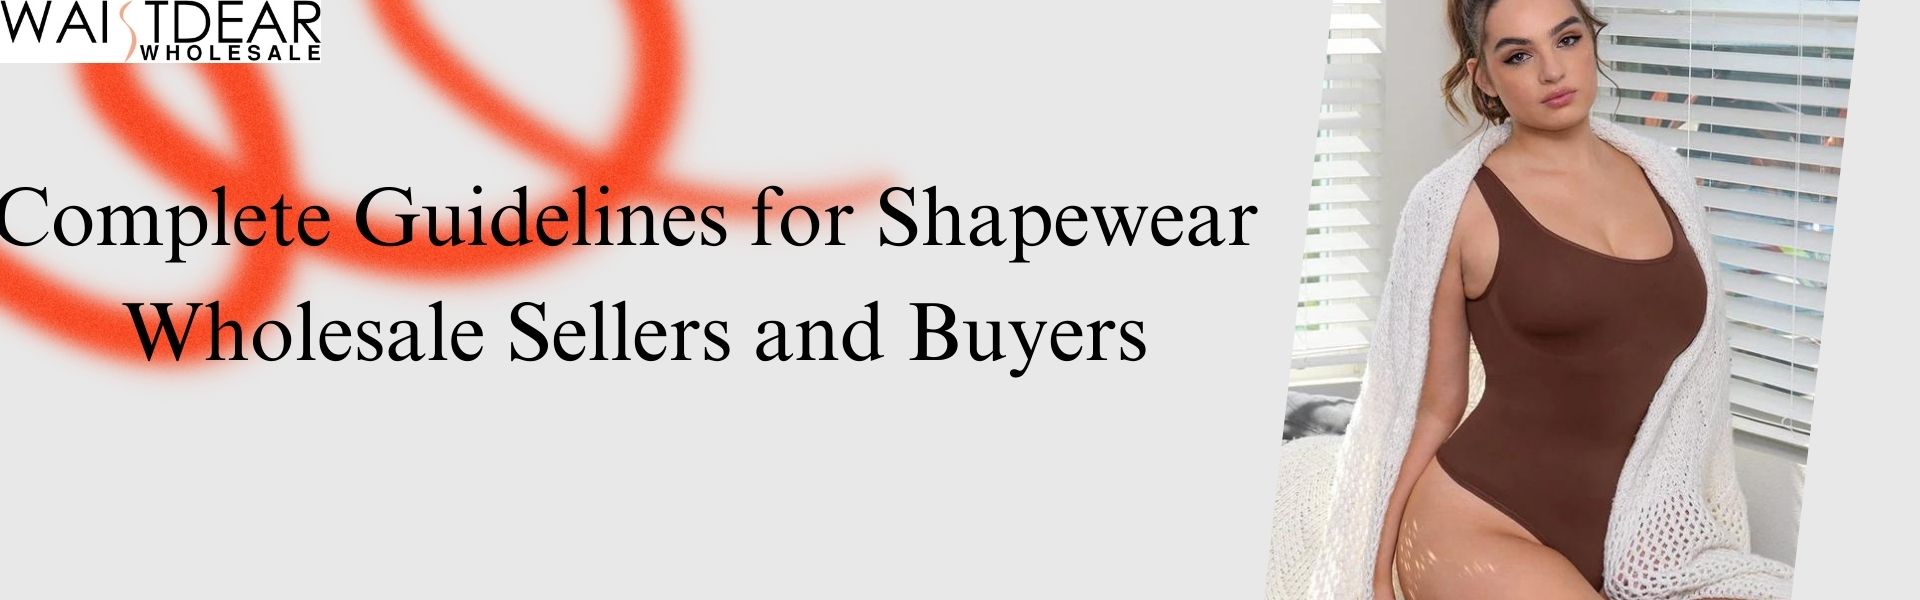 Complete Guidelines for Shapewear Wholesale Sellers and Buyers